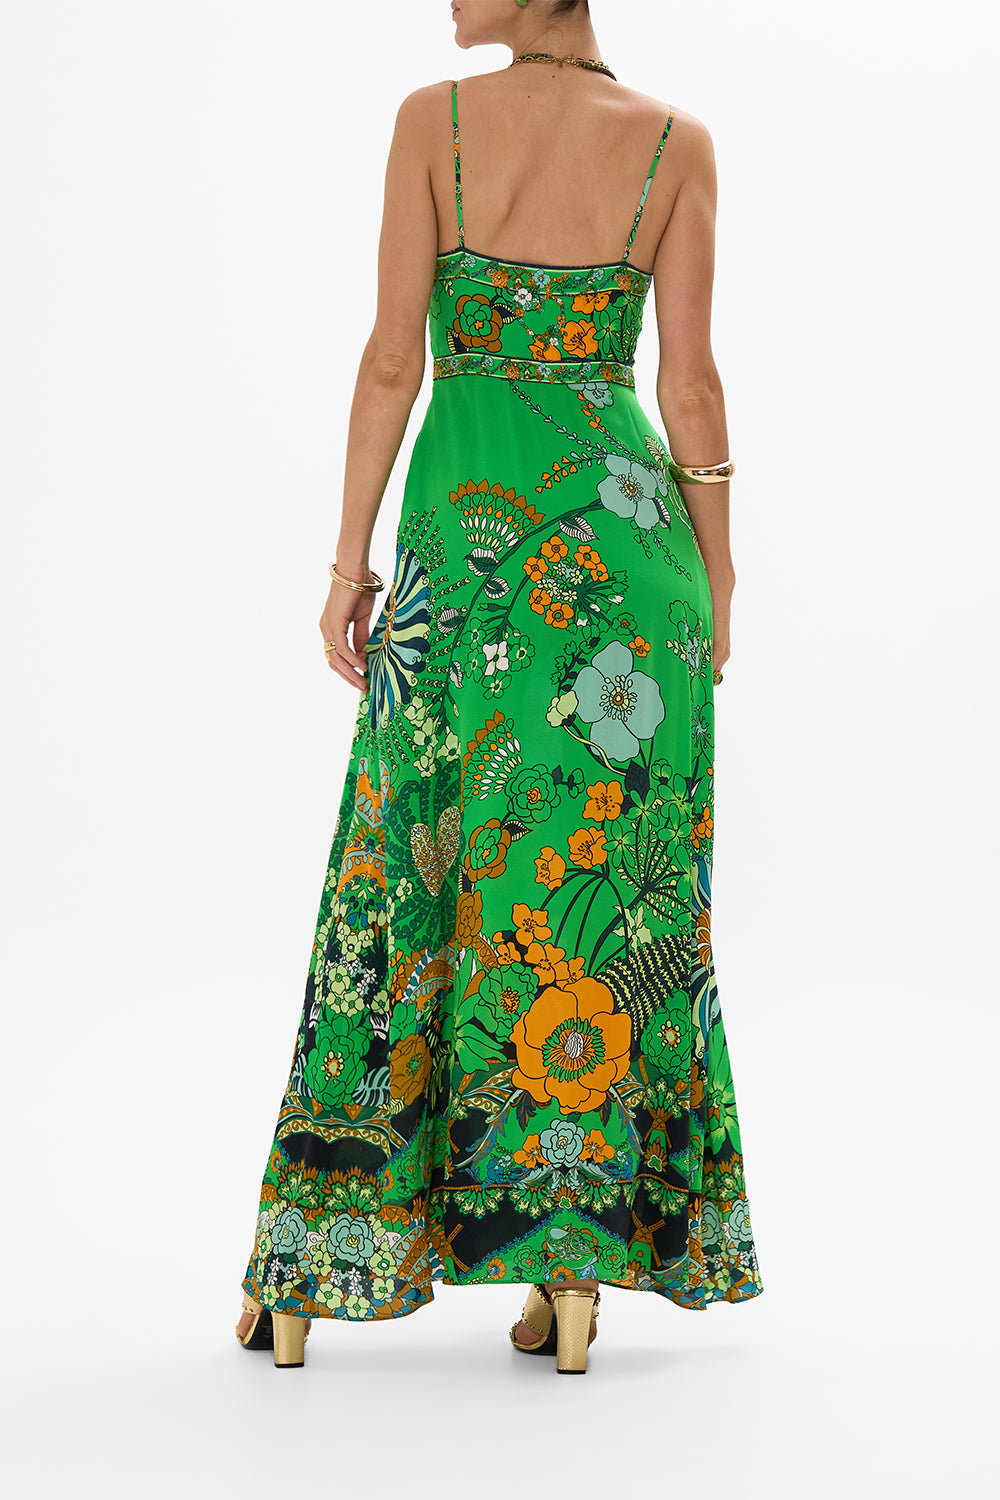 CAMILLA Green Tie Front Cut Out Maxi Dress in Good Vibes Generation